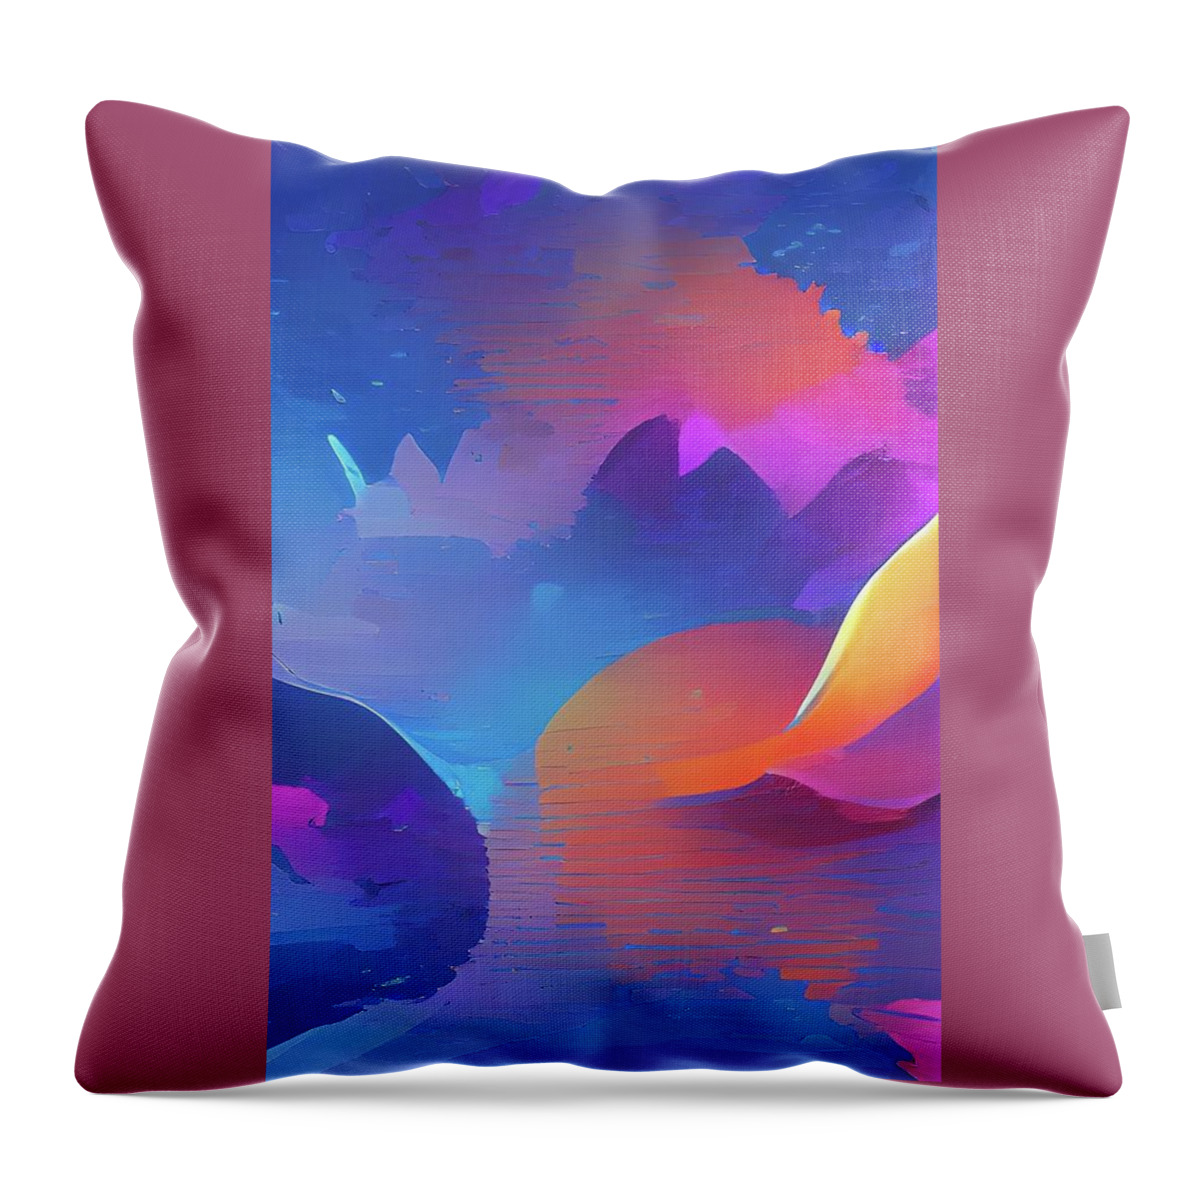  Throw Pillow featuring the digital art Peak by Rod Turner